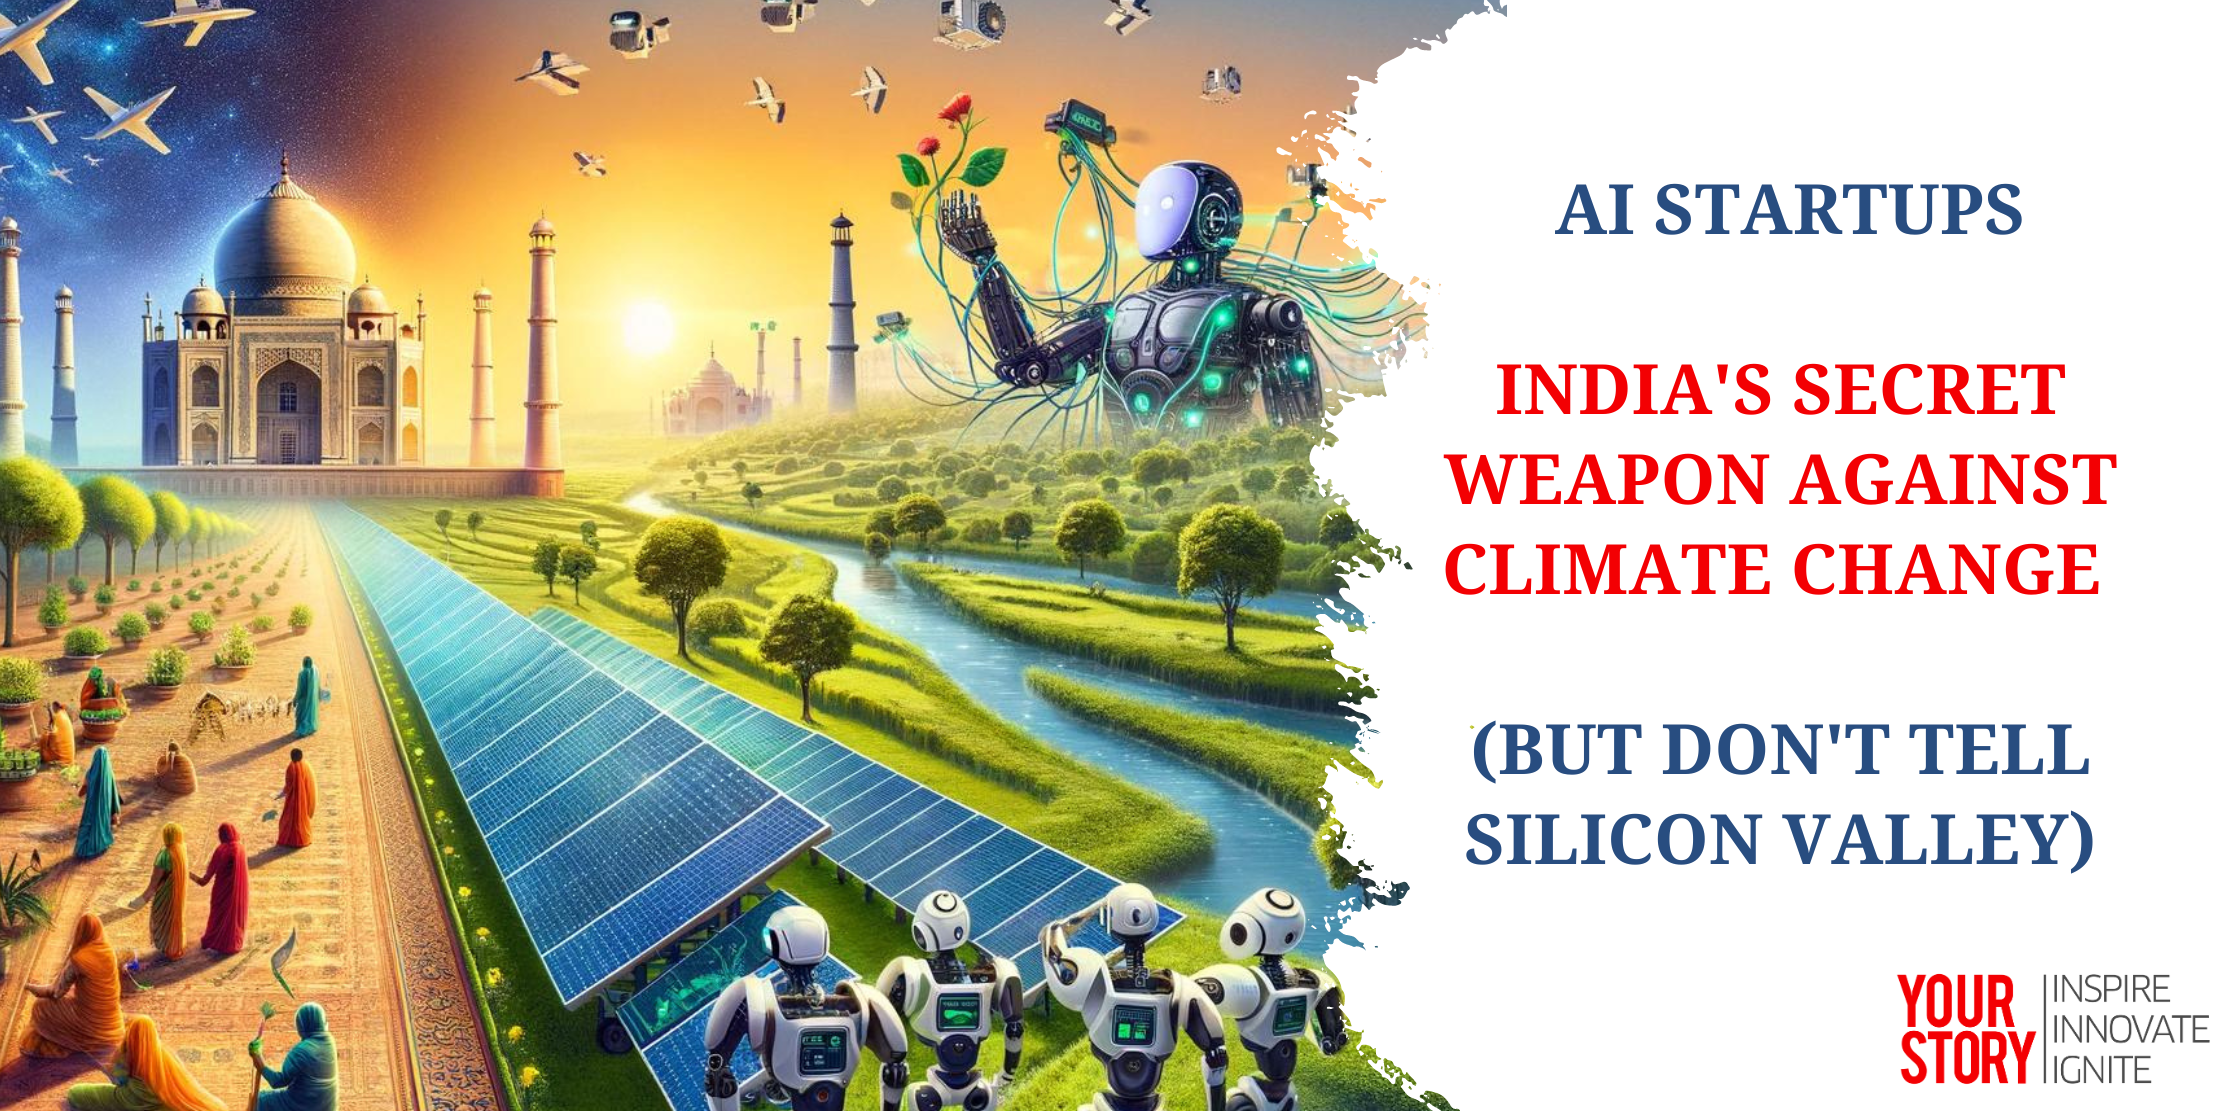 ⁠ AI Startups: India's Secret Weapon Against Climate Change (But Don't Tell Silicon Valley)